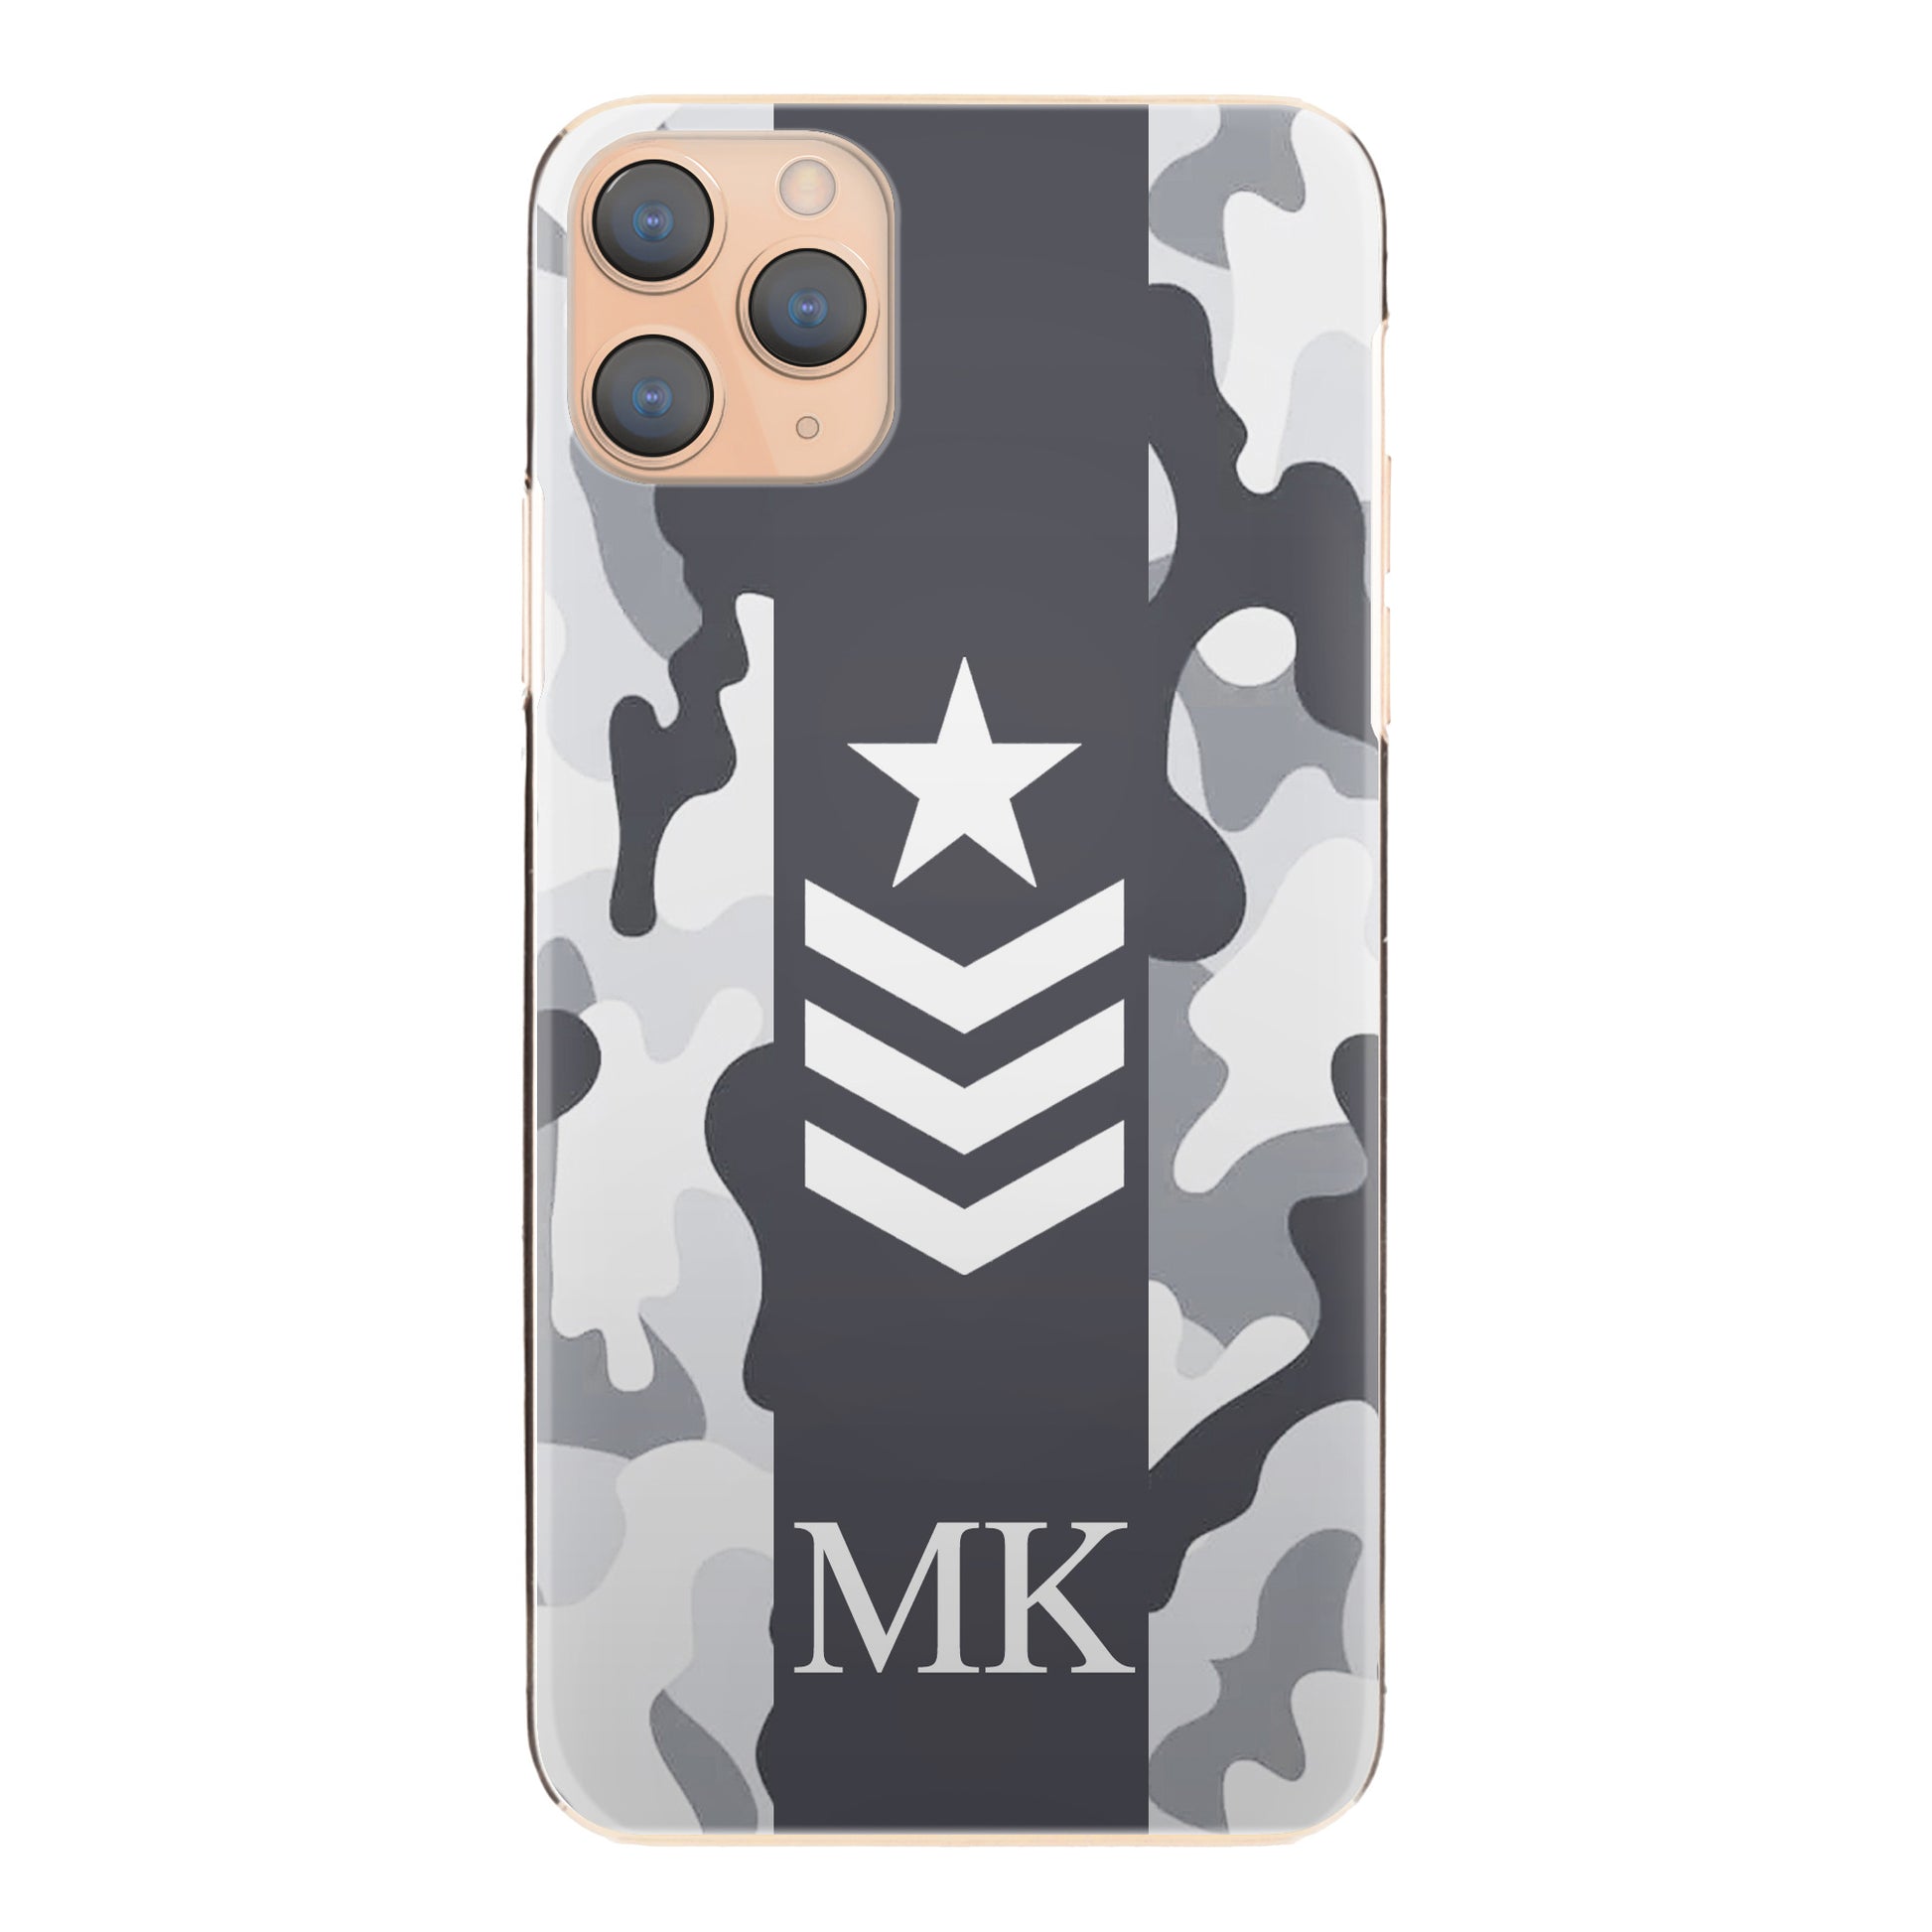 Personalised Apple iPhone Hard Case with Initials and Army Rank on Artic Camo